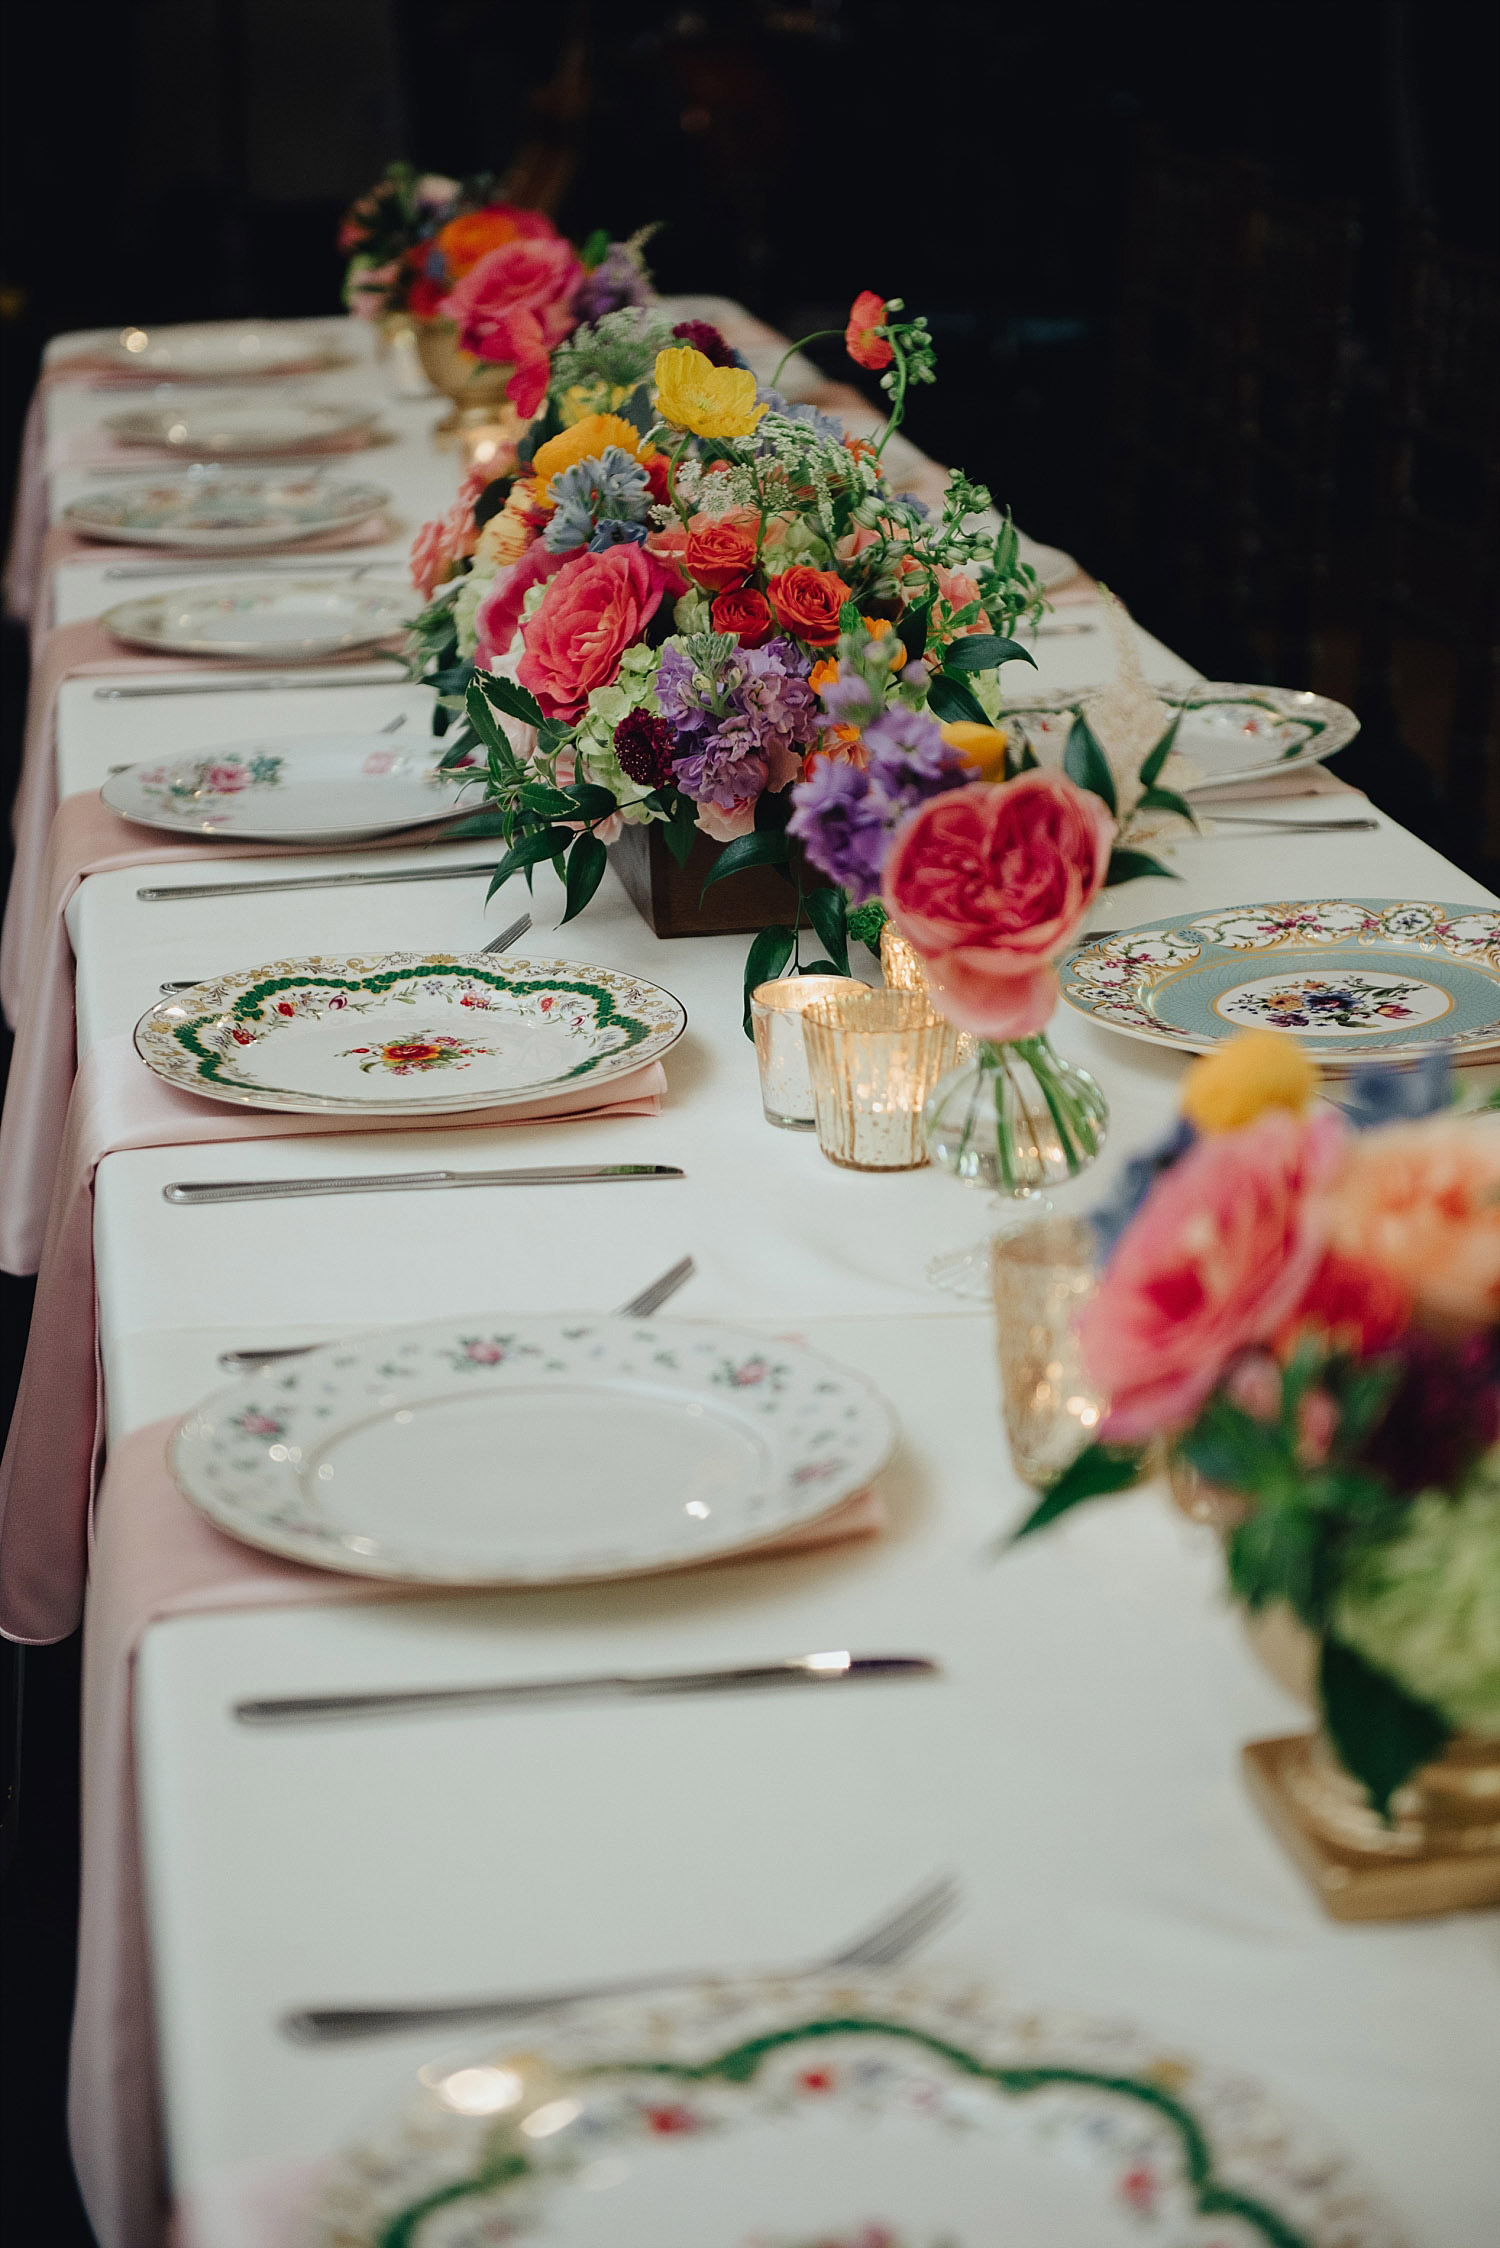 The Orchard Azle wedding head table with vintage plates